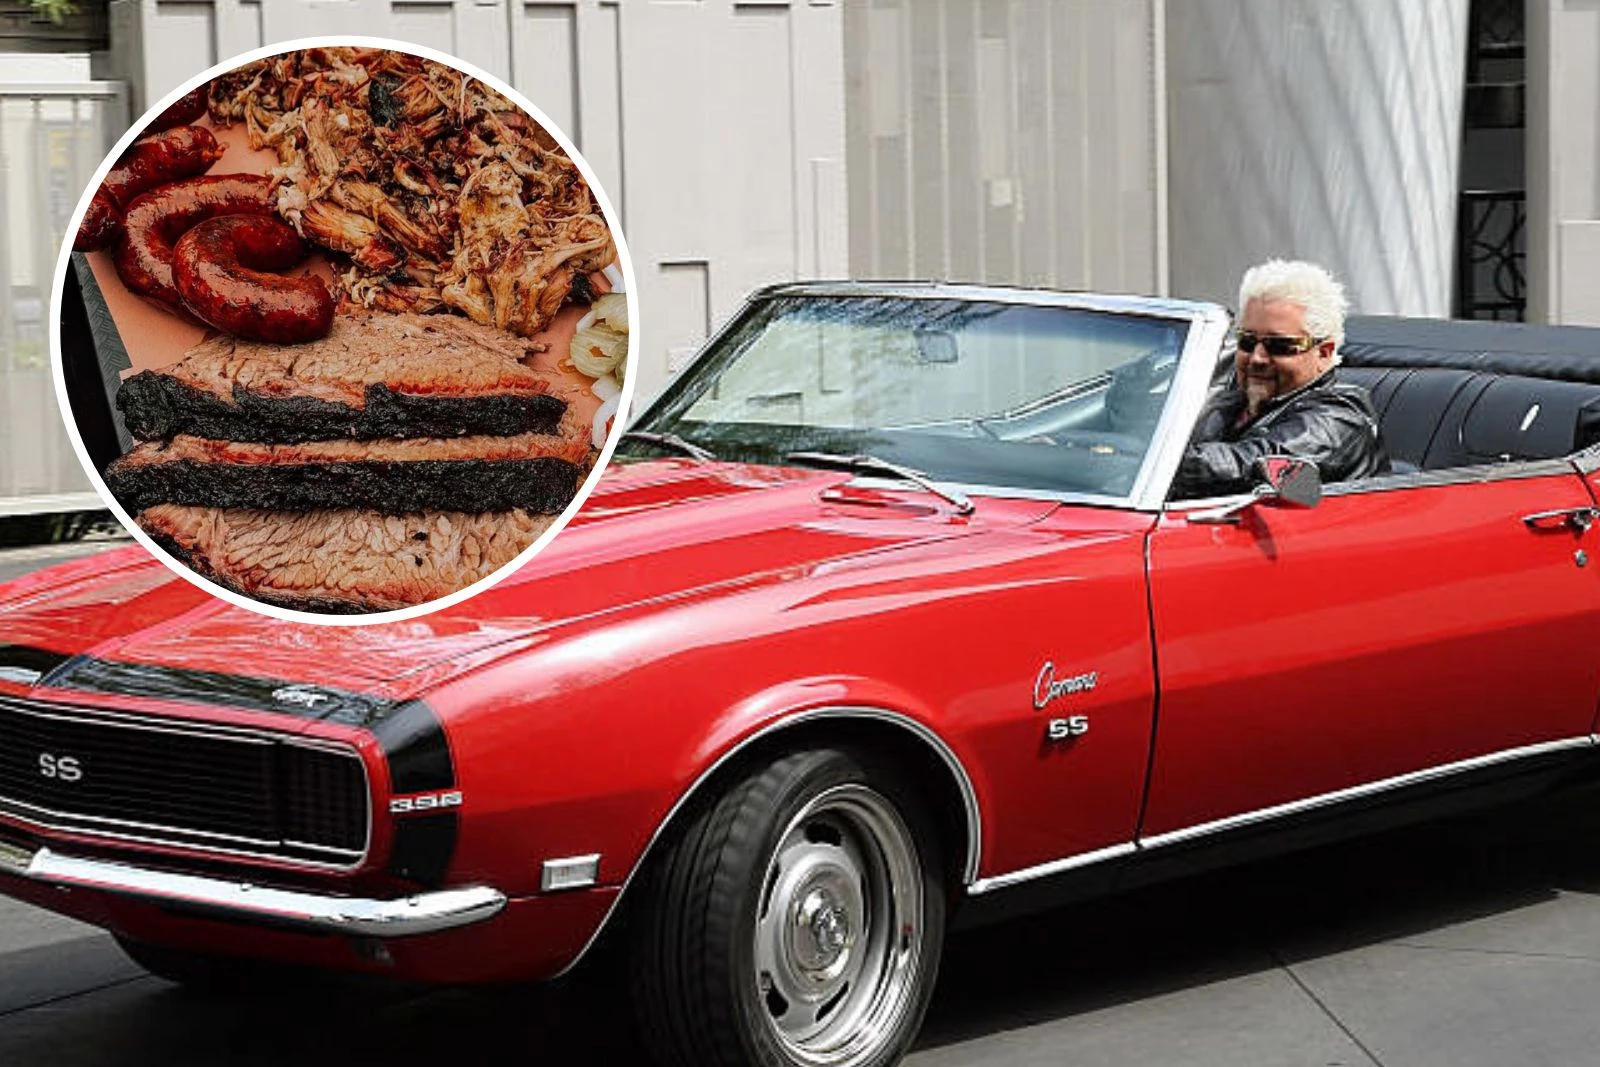 Guy Fieri Names His Favorite Texas Restaurant of All Time